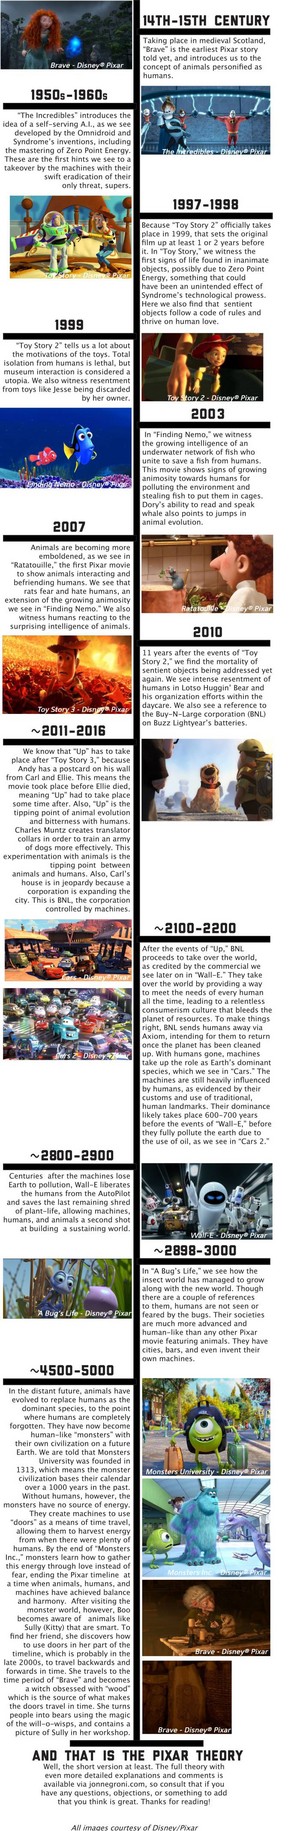 The Pixar Theory Infographic- made by Jon Negroni